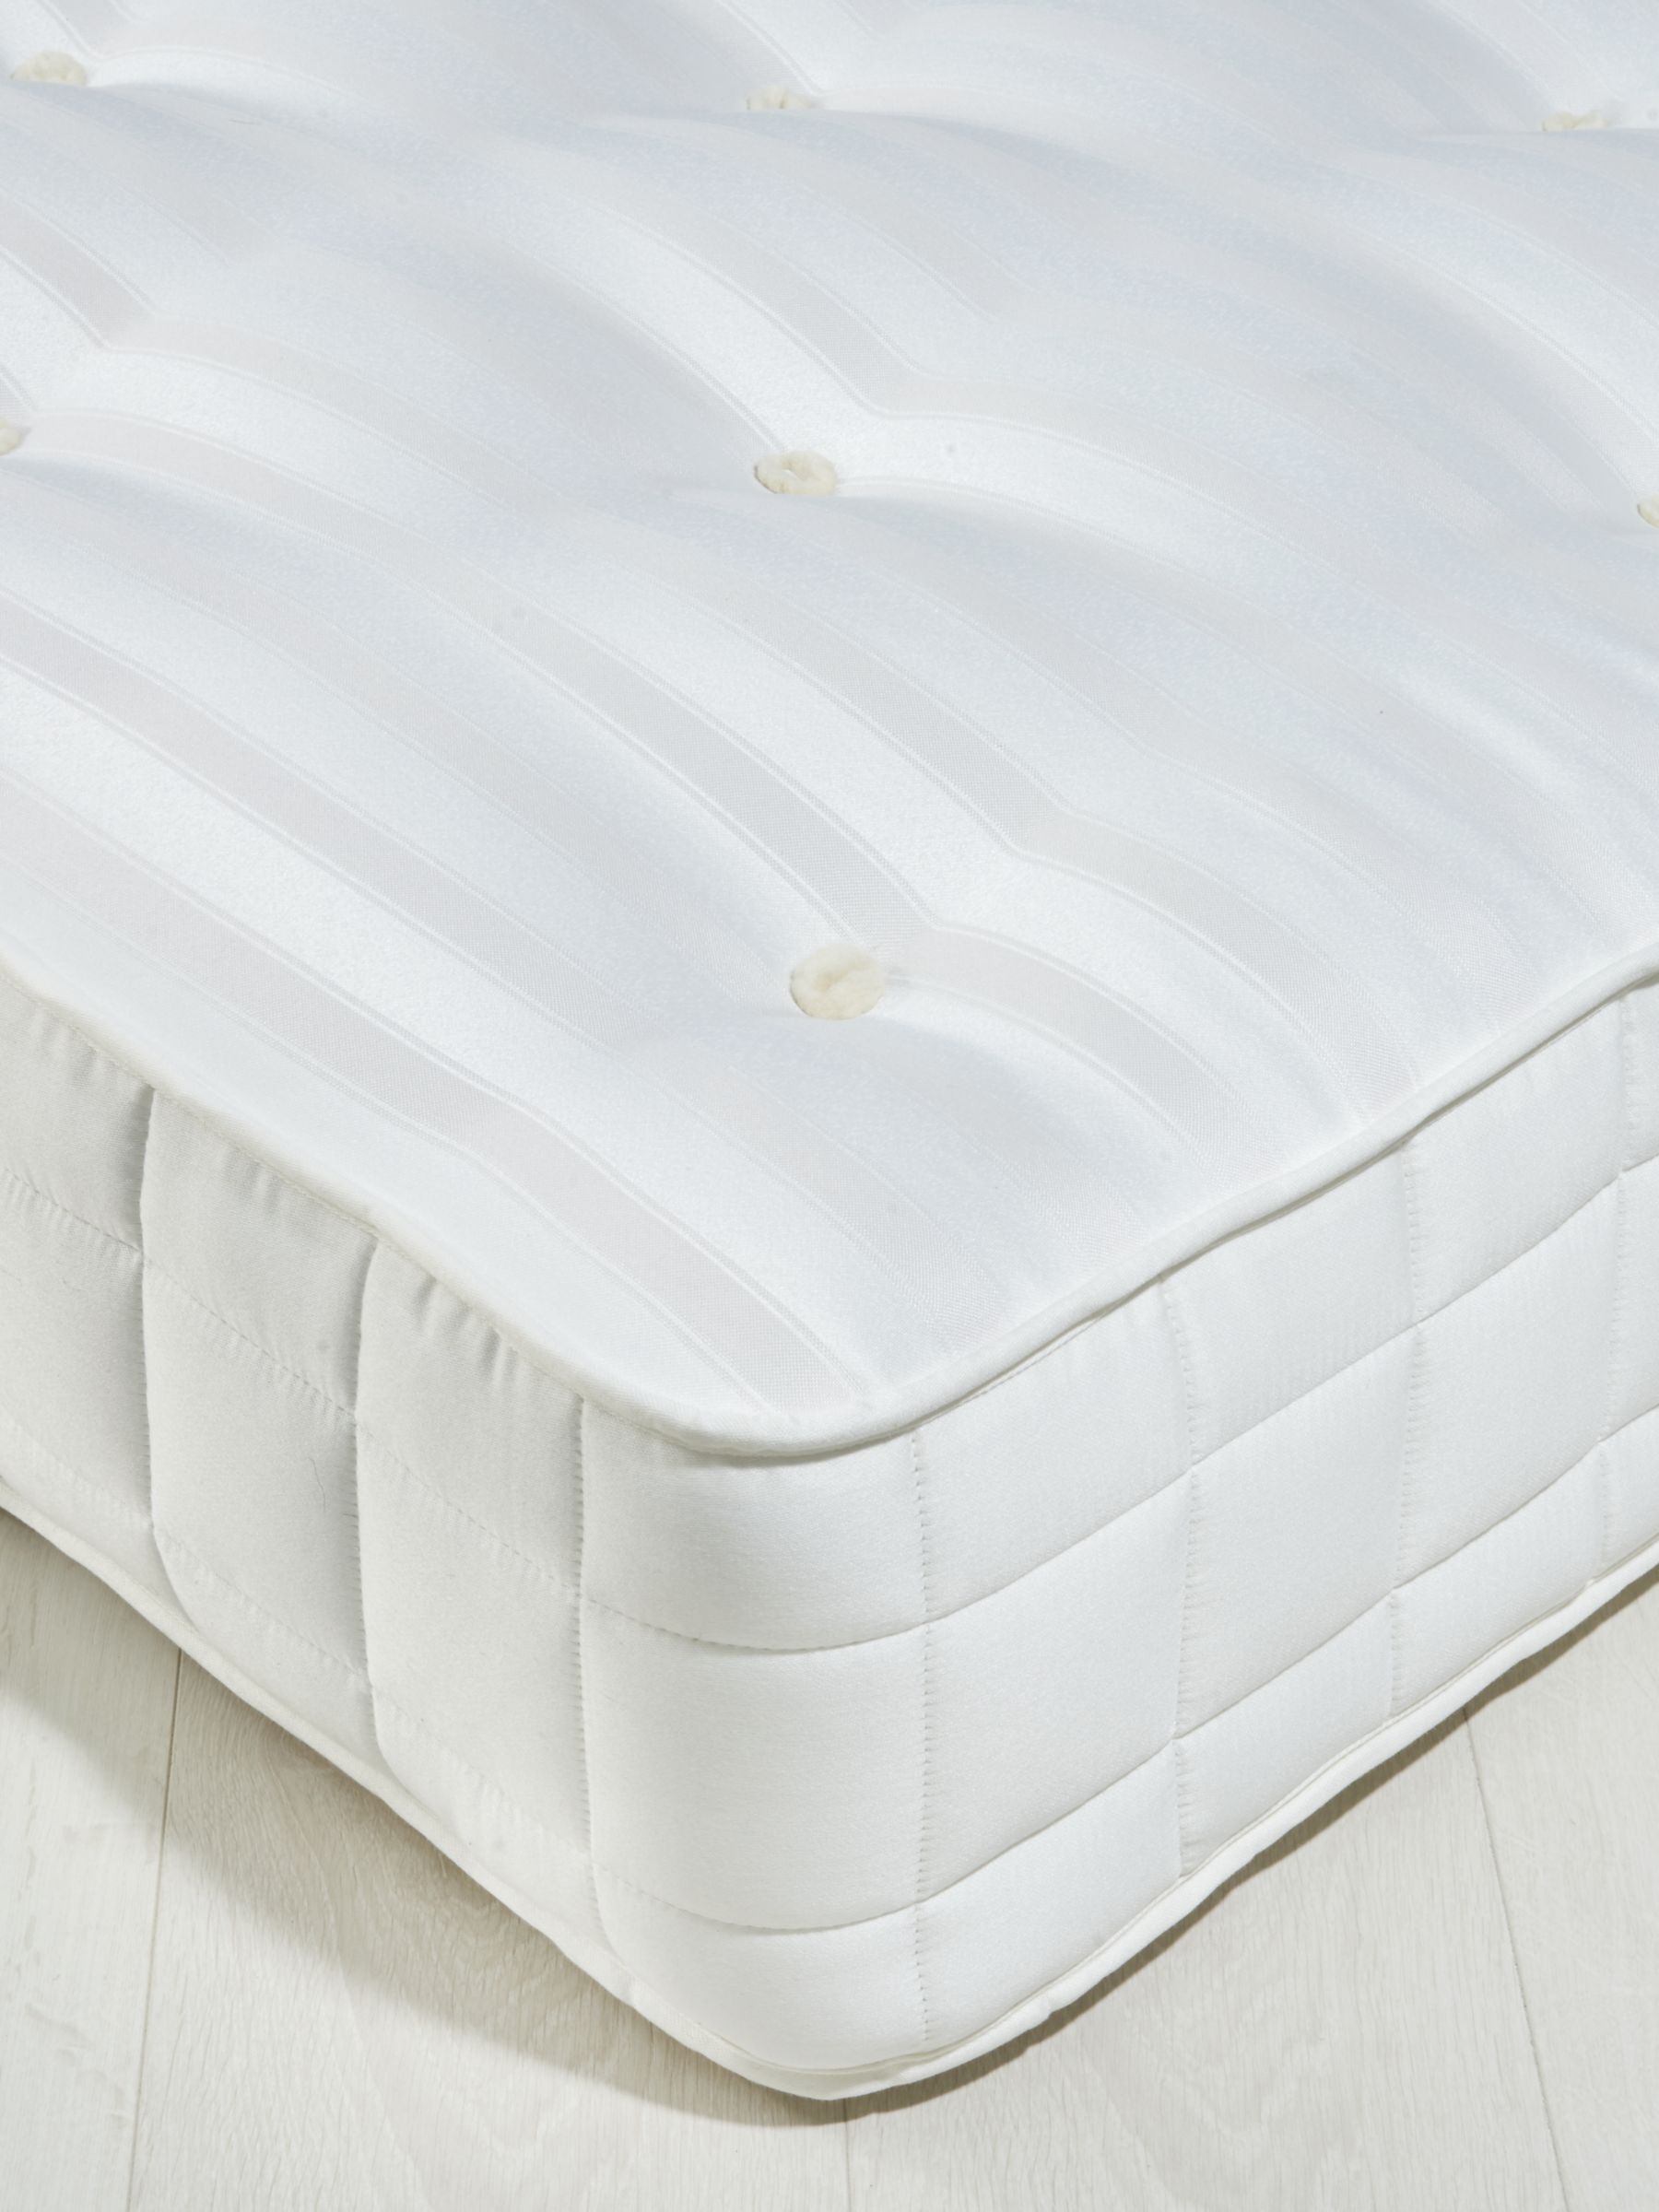 John Lewis & Partners Classic Collection Comfort Support 800 Pocket Spring Mattress, Medium Tension, Super King Size